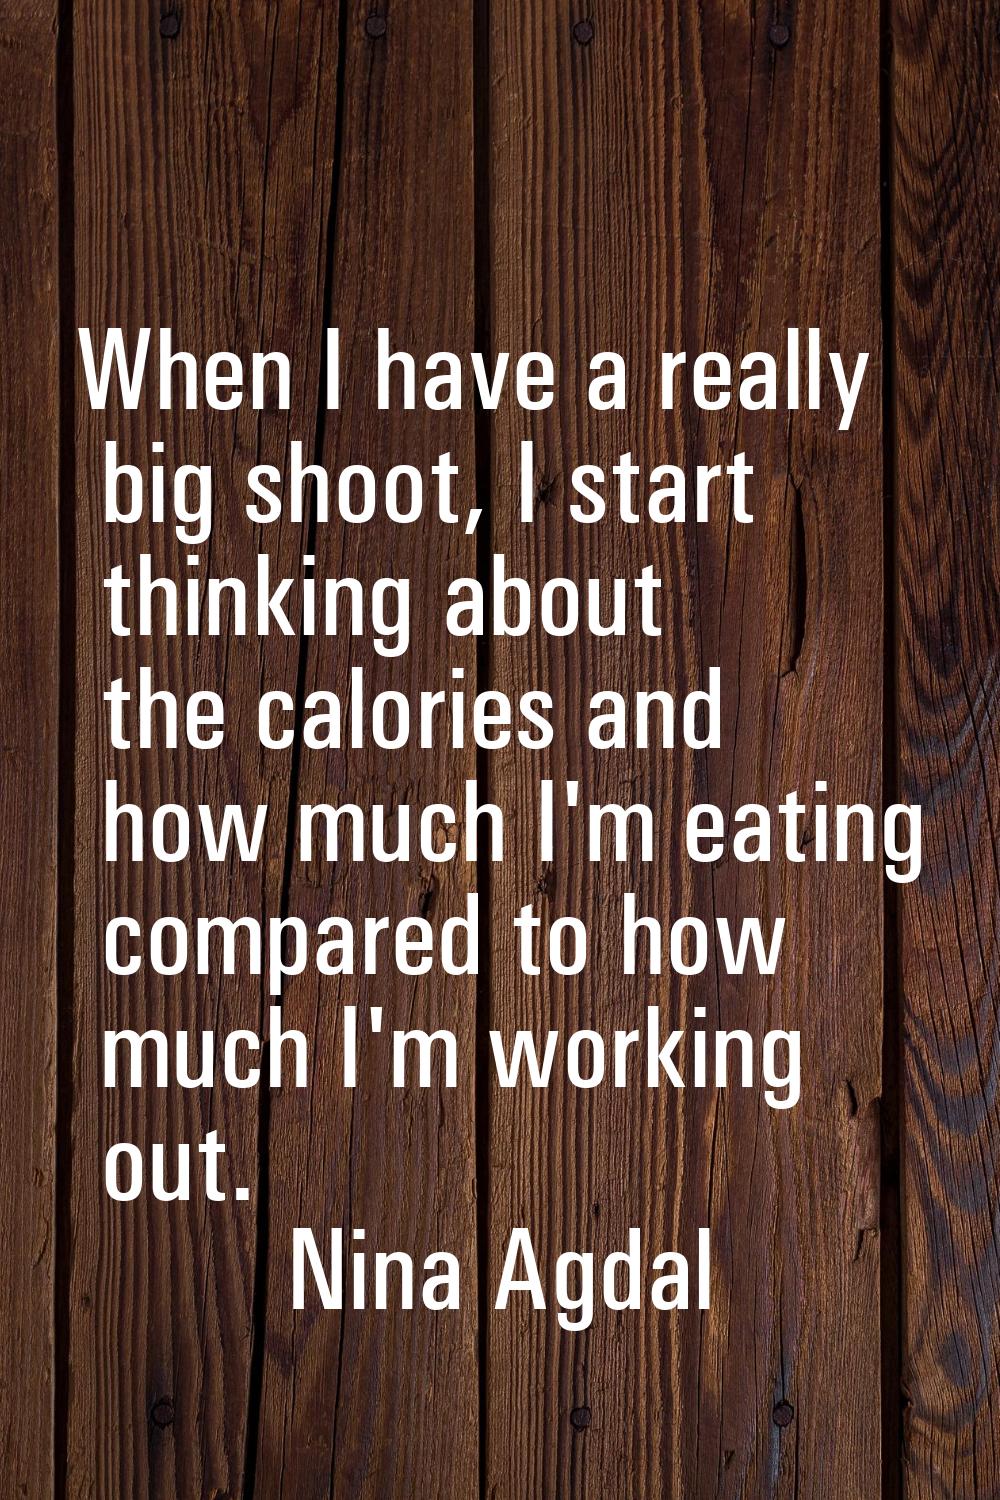 When I have a really big shoot, I start thinking about the calories and how much I'm eating compare